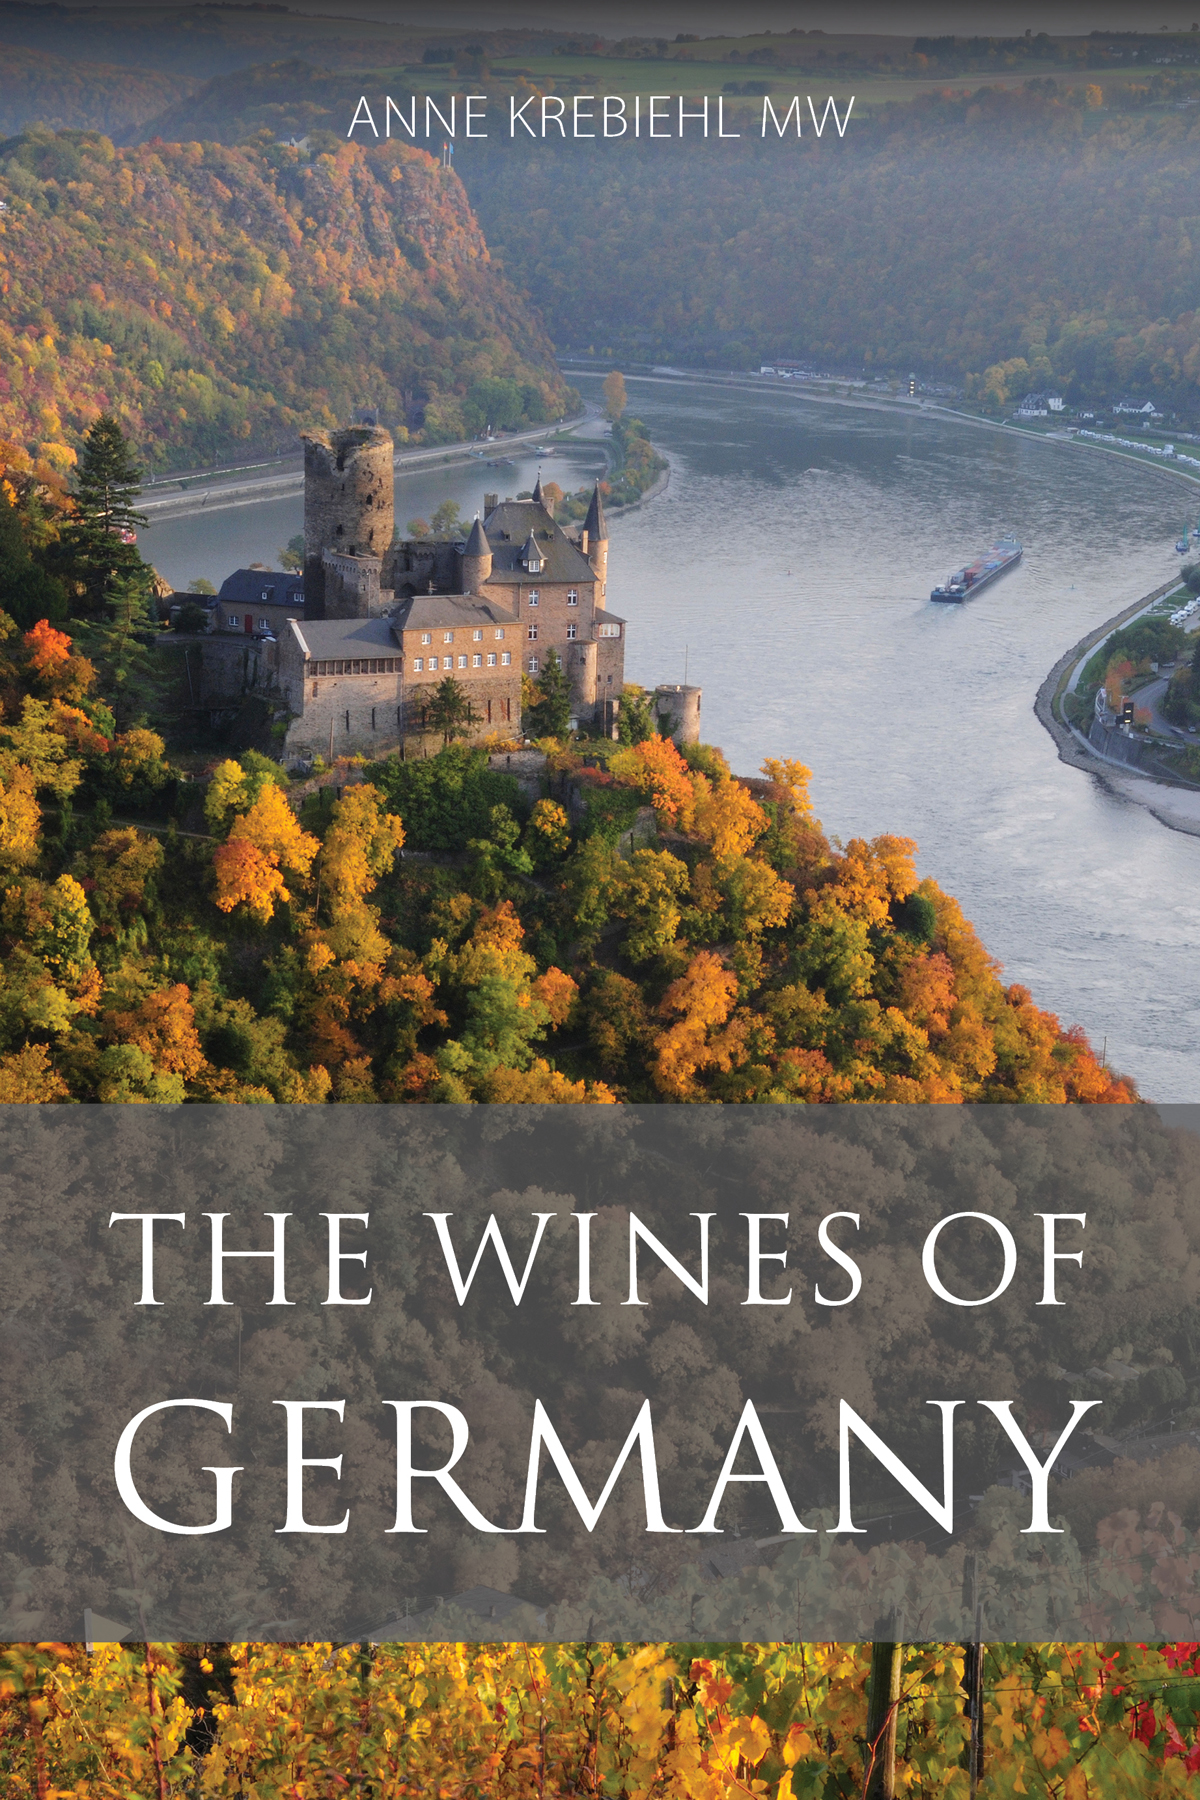 Extract: The wines of Germany, by Anne Krebiehl MW